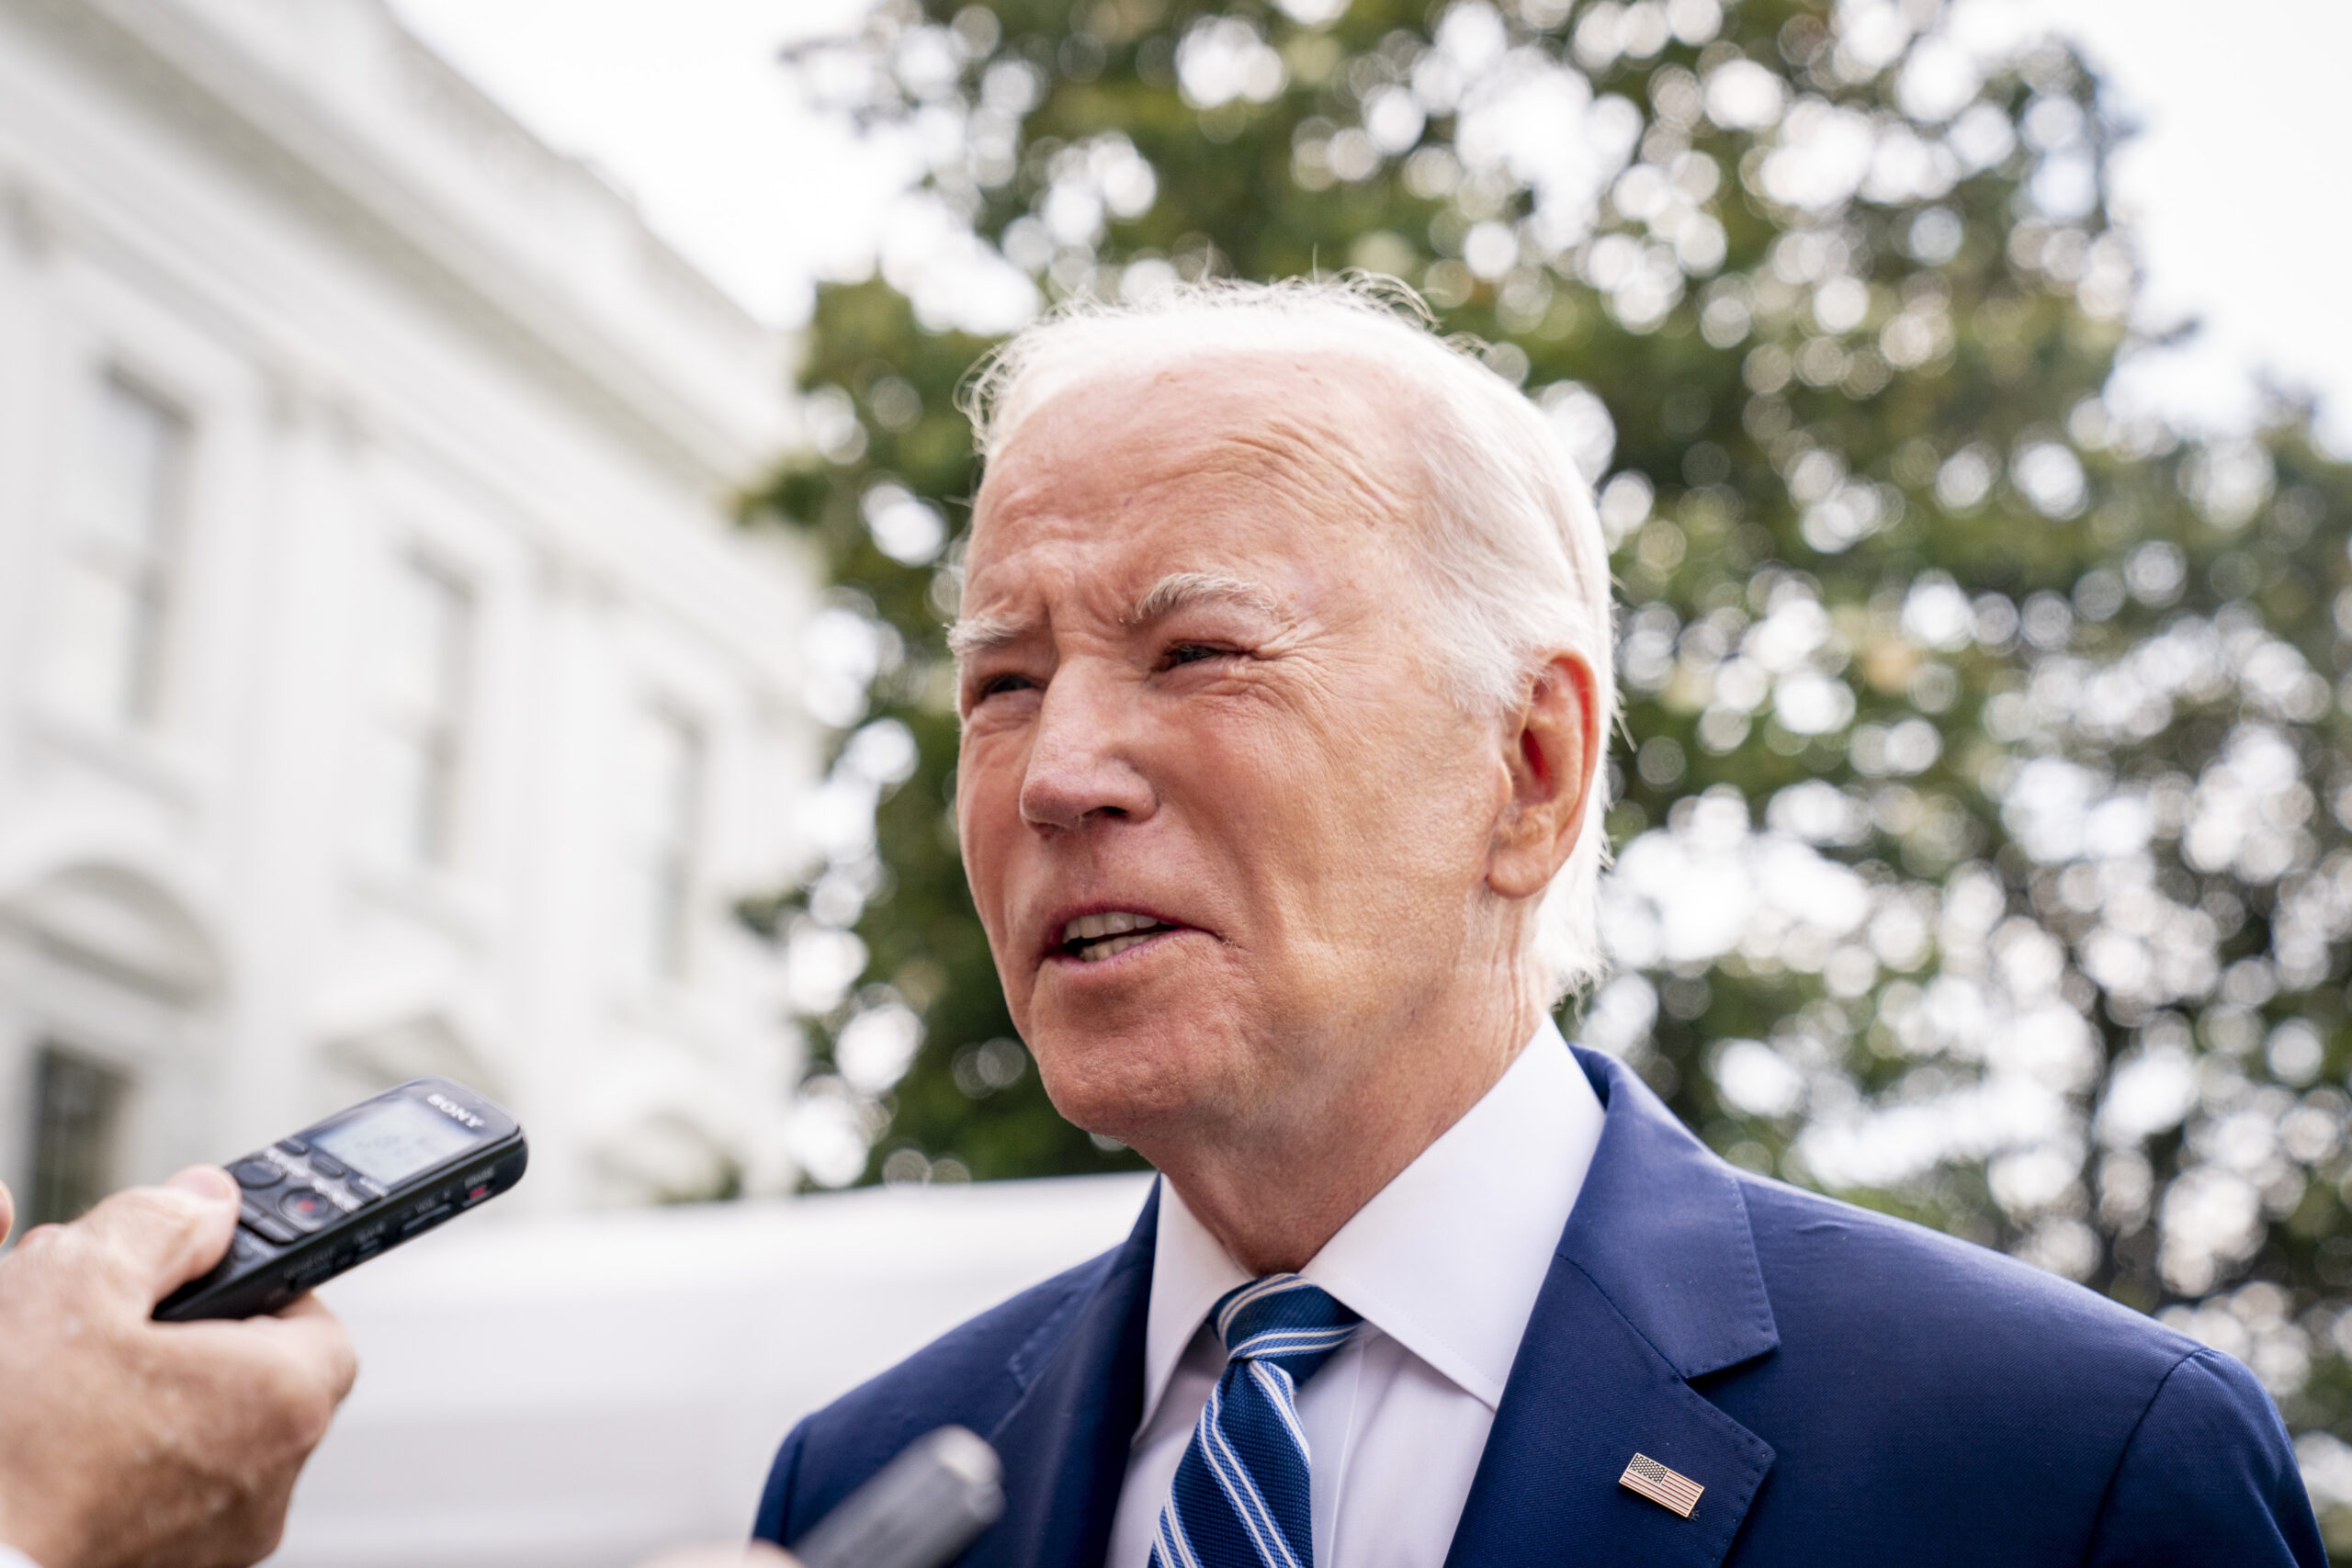 Biden Baffles Reporters With Marks on Face, Bloomberg Breaks Reason Why